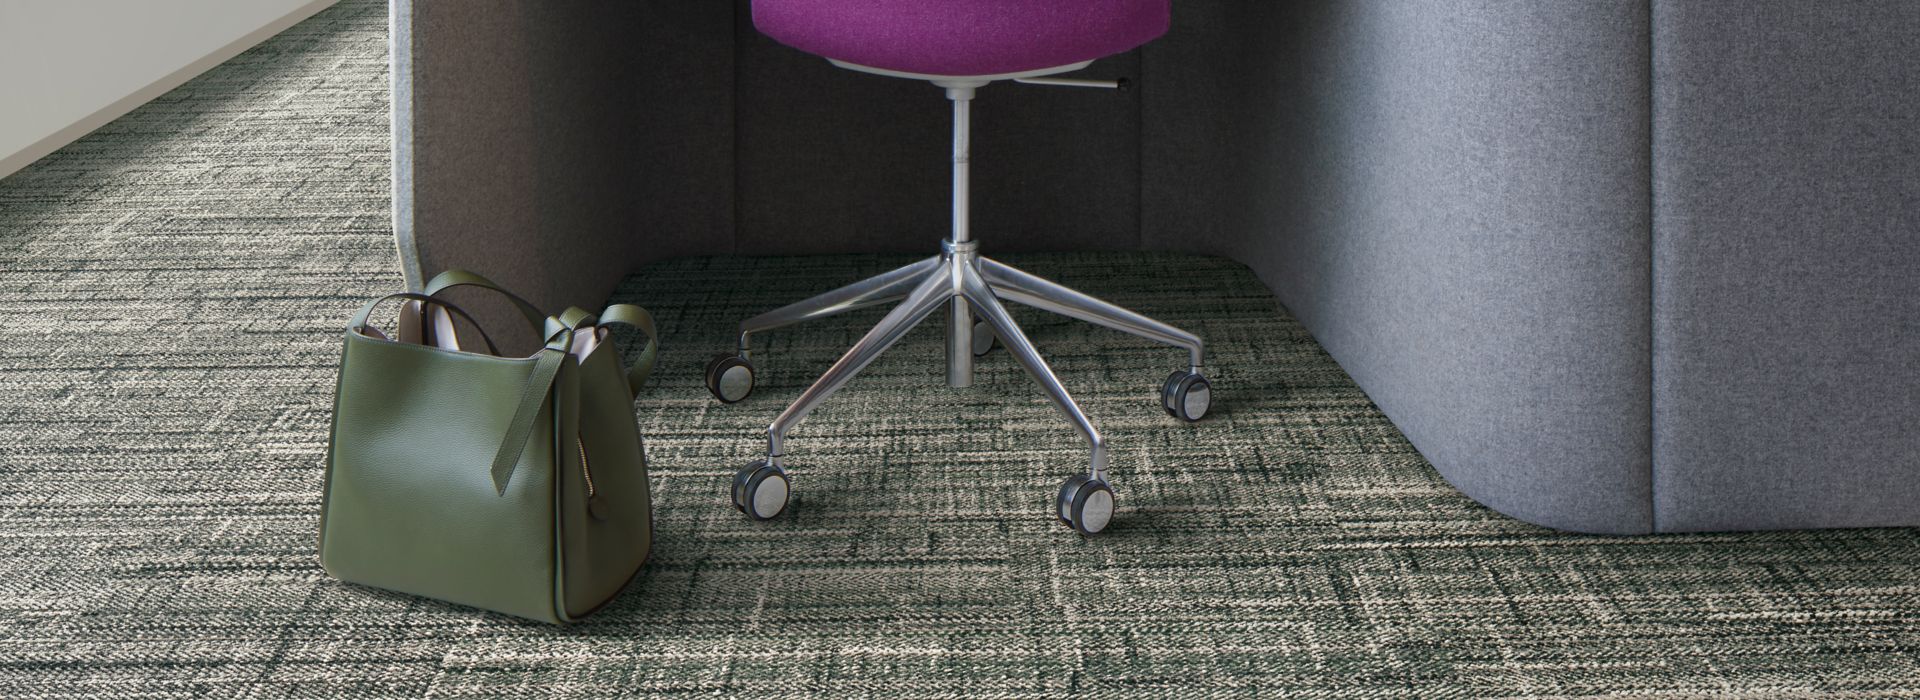 Interface French Seams carpet tile with workstations